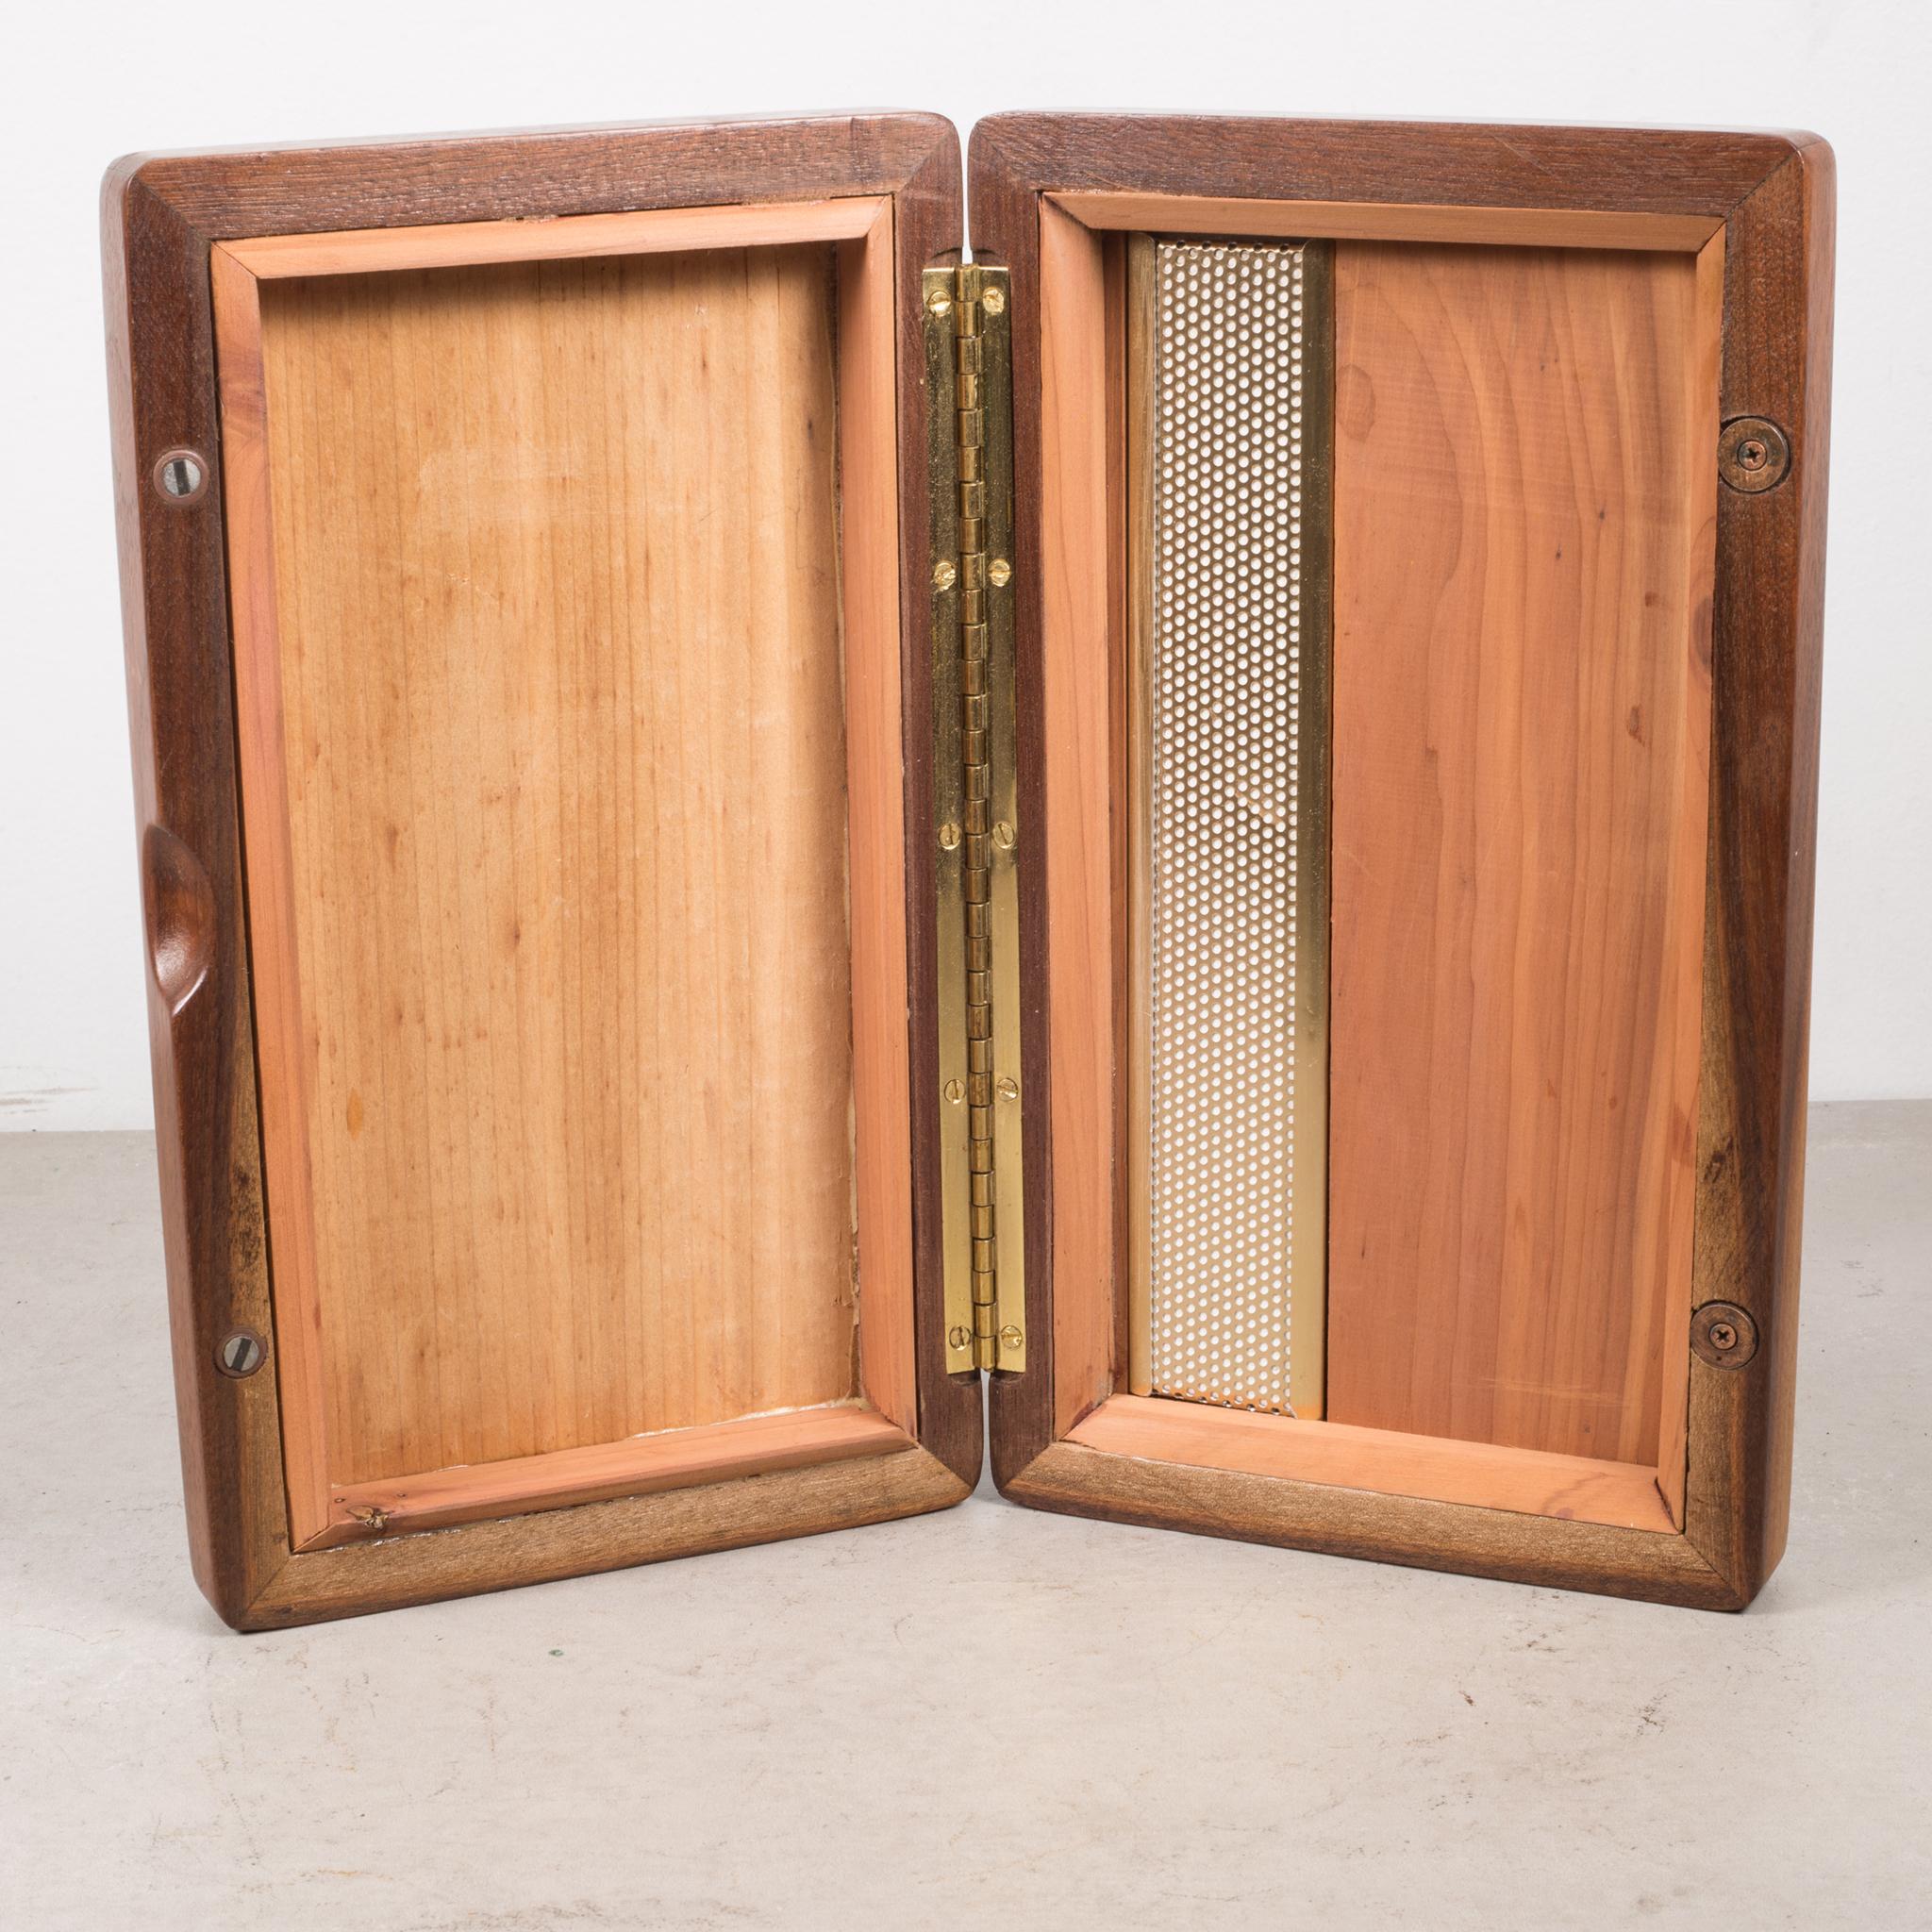 About

A solid, well made midcentury walnut humidor lined with cedar and brass accents. Pleasant cedar scent inside.

 Creator: Unknown.
 Date of manufacture: circa 1960s-1970s.
 Materials and techniques: Walnut, cedar, brass.
 Condition: